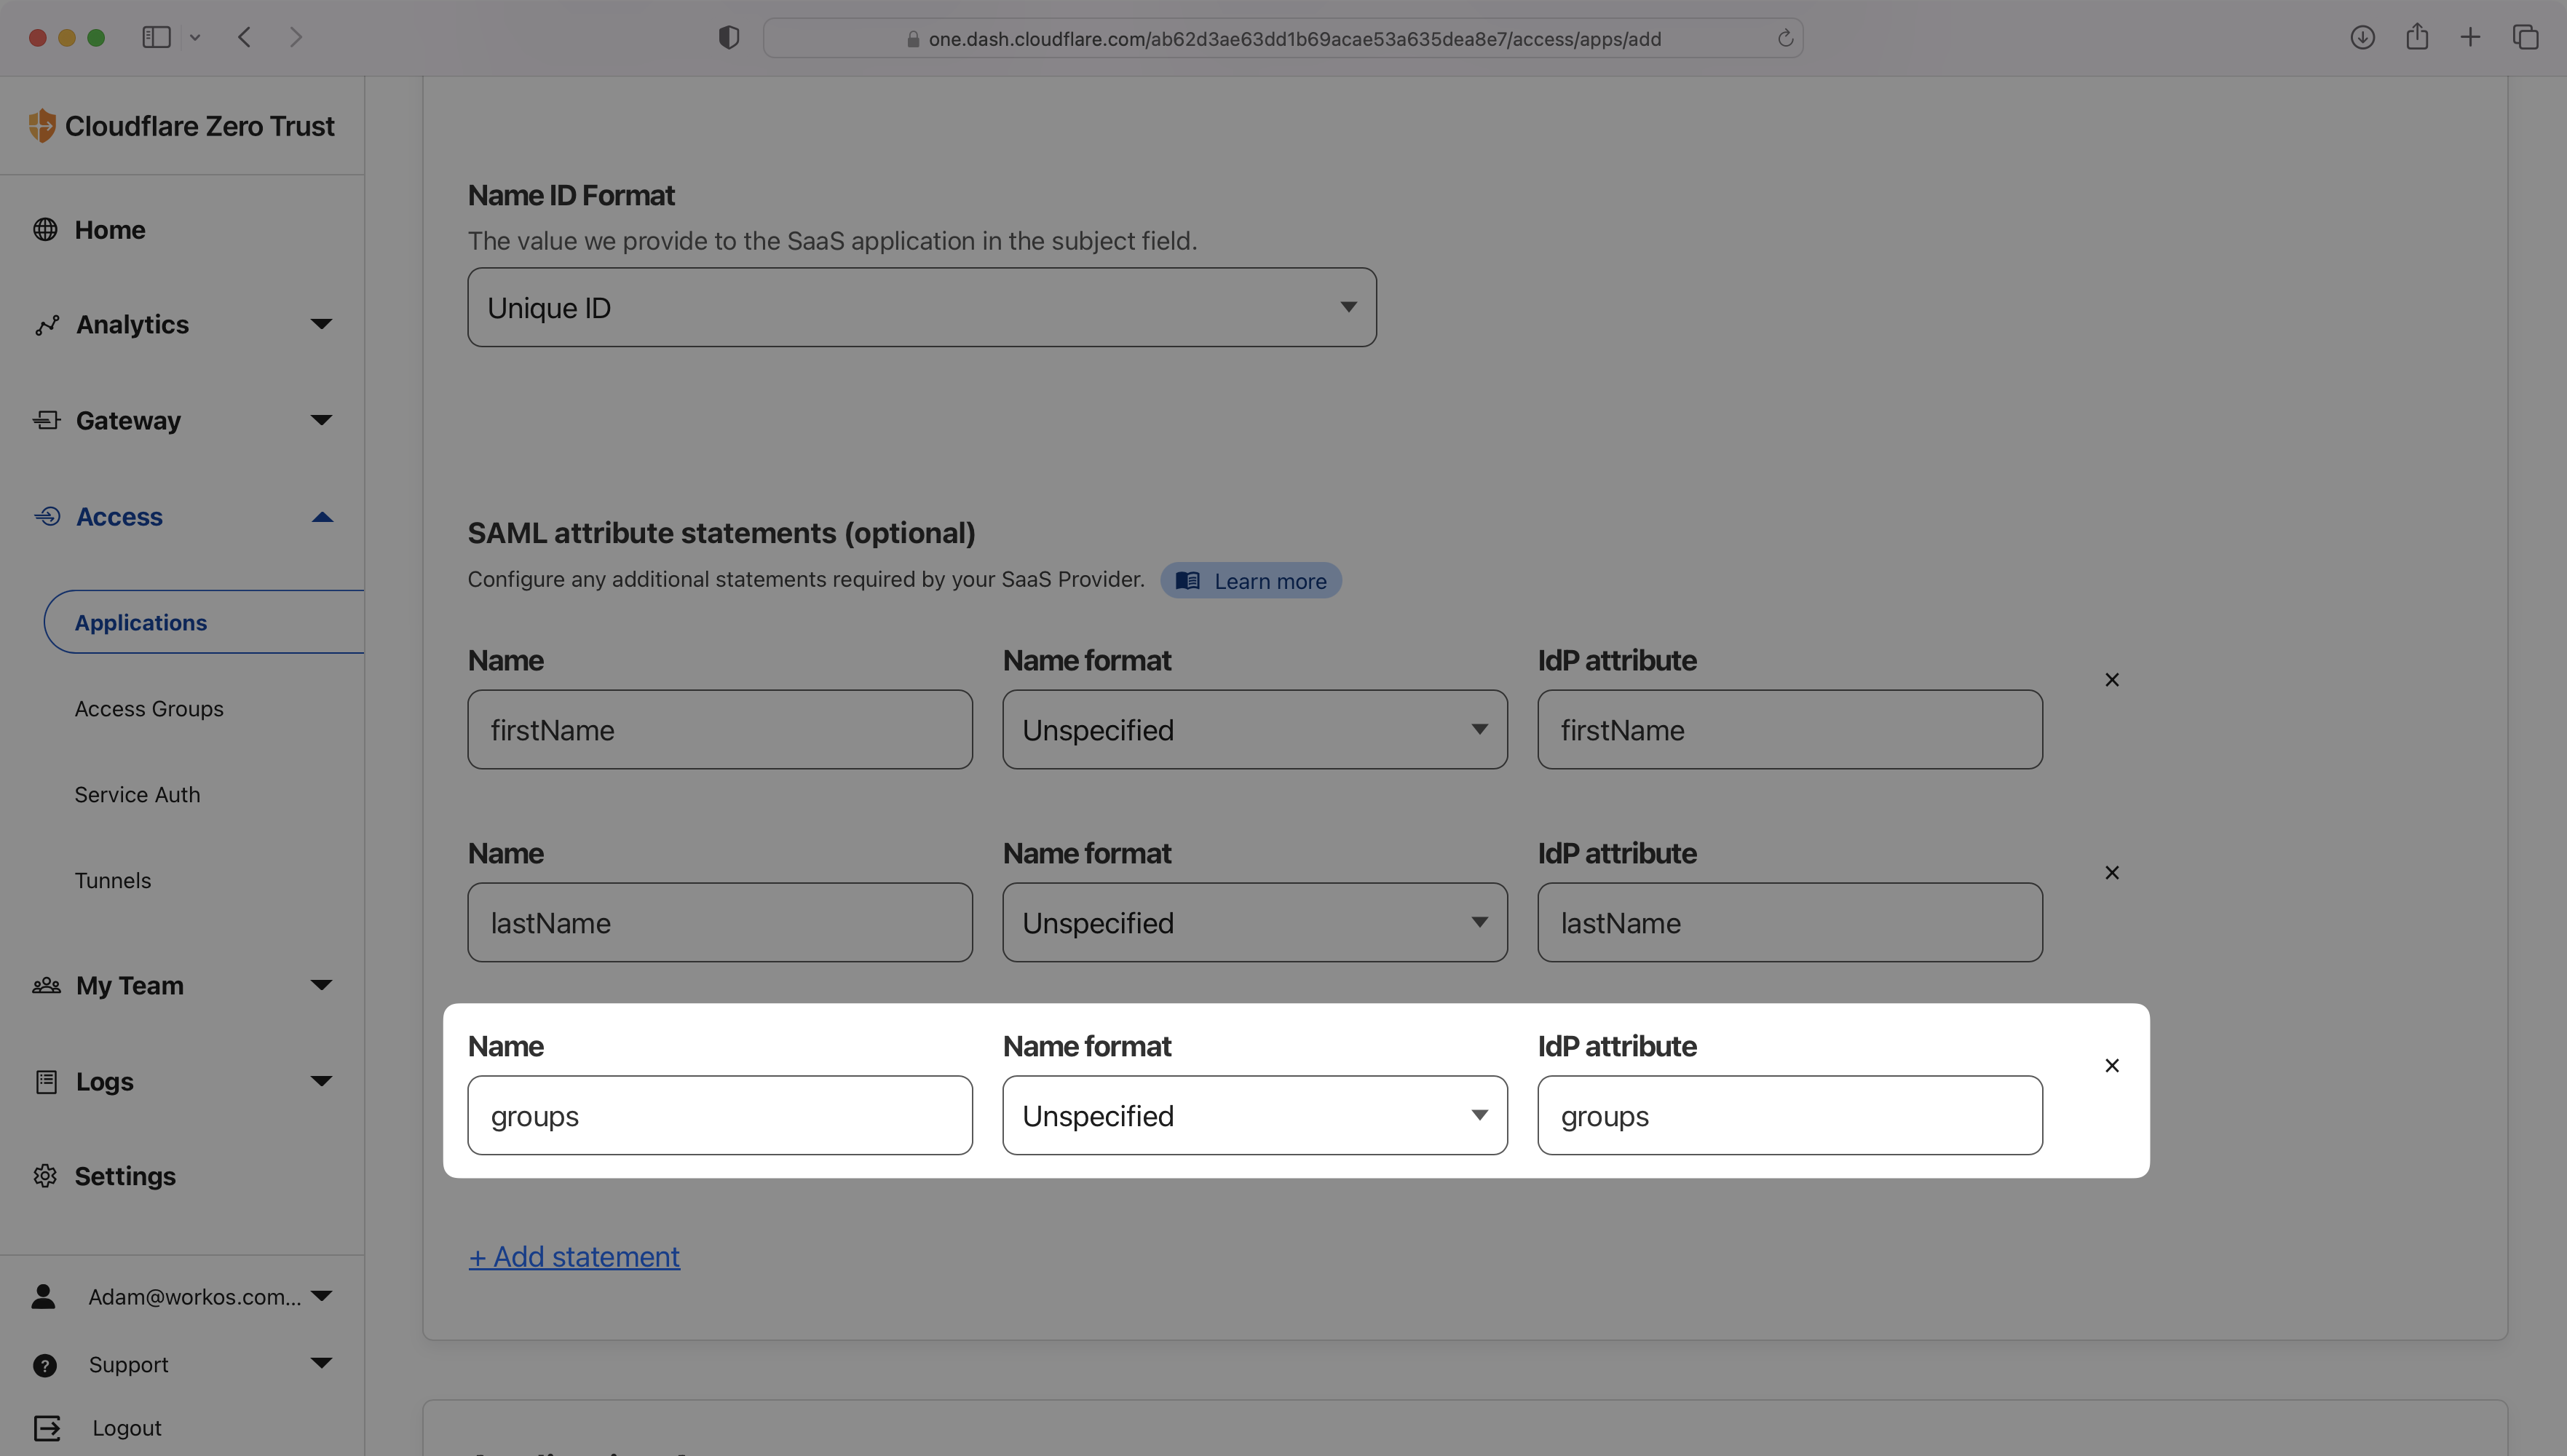 A screenshot showing how to configure a groups attribute in Cloudflare.